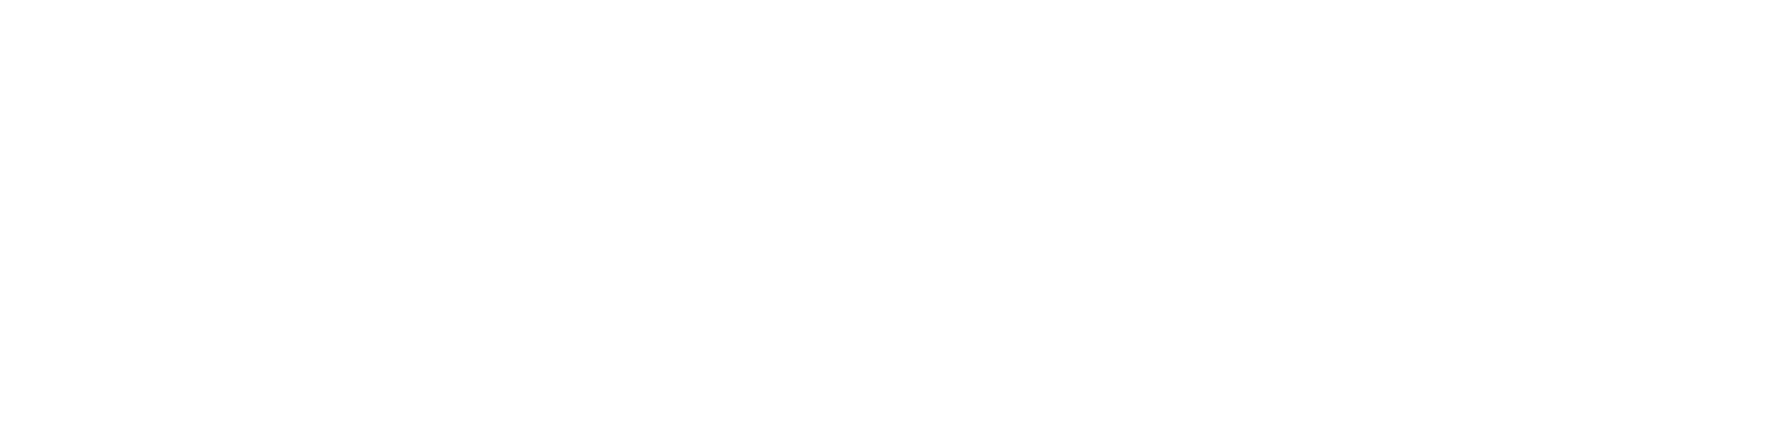 logo text for the plan, which reads "Downtown Columbia" and "STRATEGIC PLAN & DESIGN GUIDELINES" in white